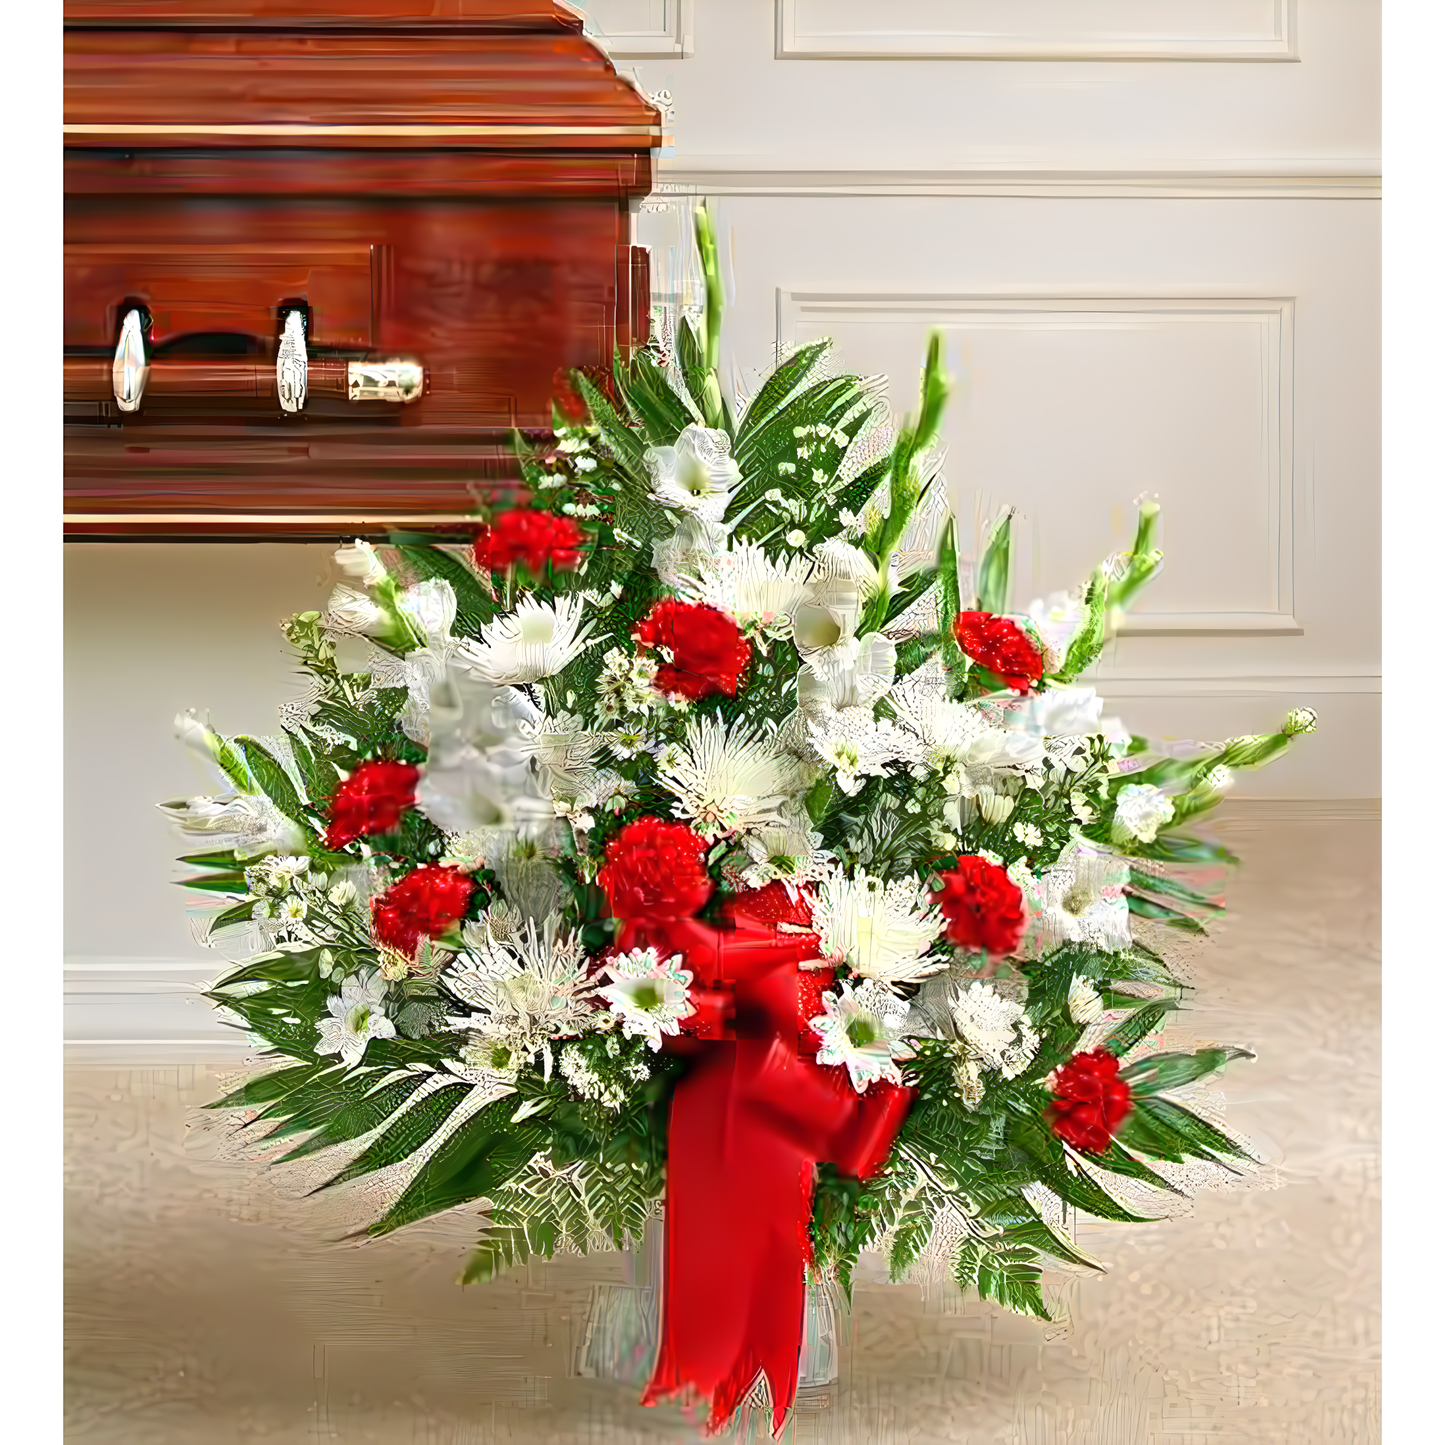 NYC Flower Delivery - Tribute Red & White Floor Basket Arrangement - Funeral > For the Service